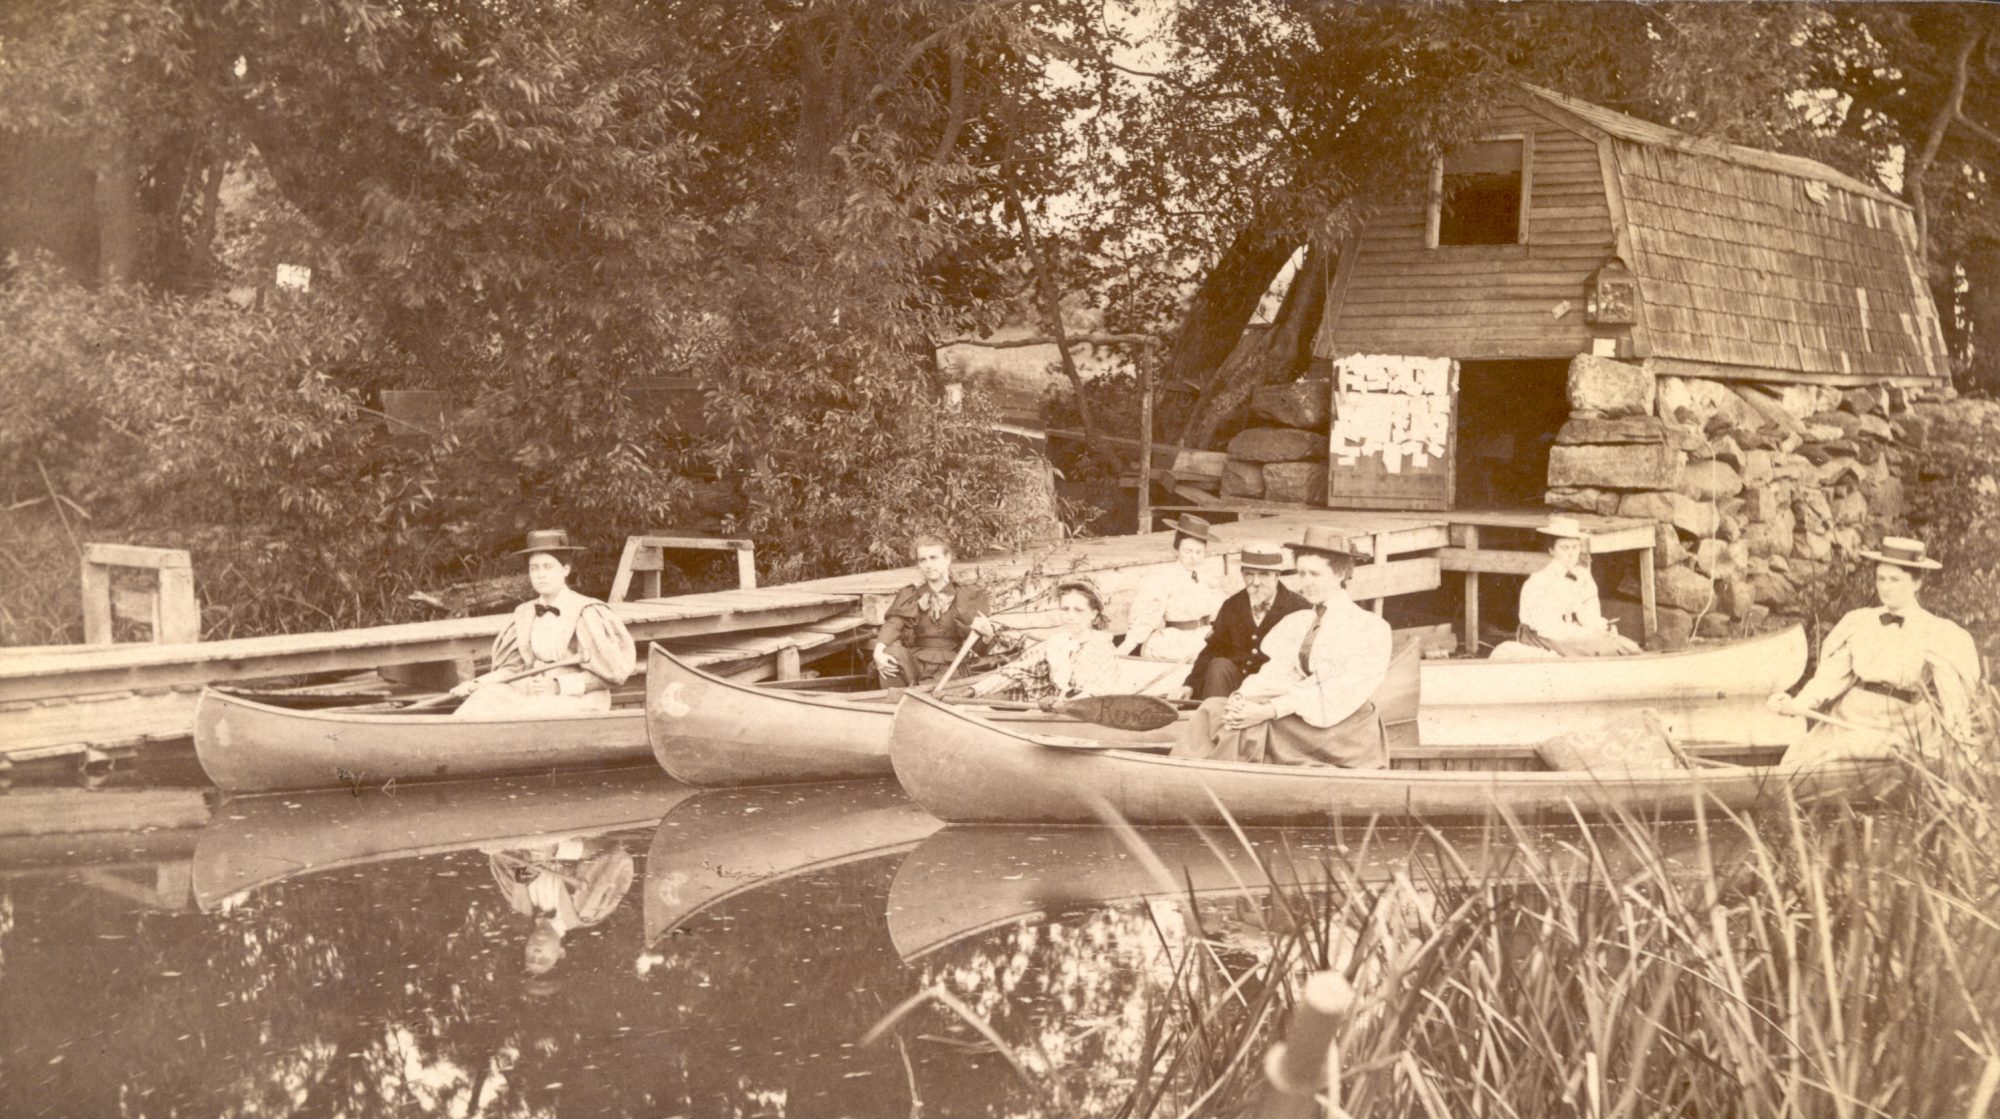 Canoeing on the Concord River 1893 Concord Museum Collection